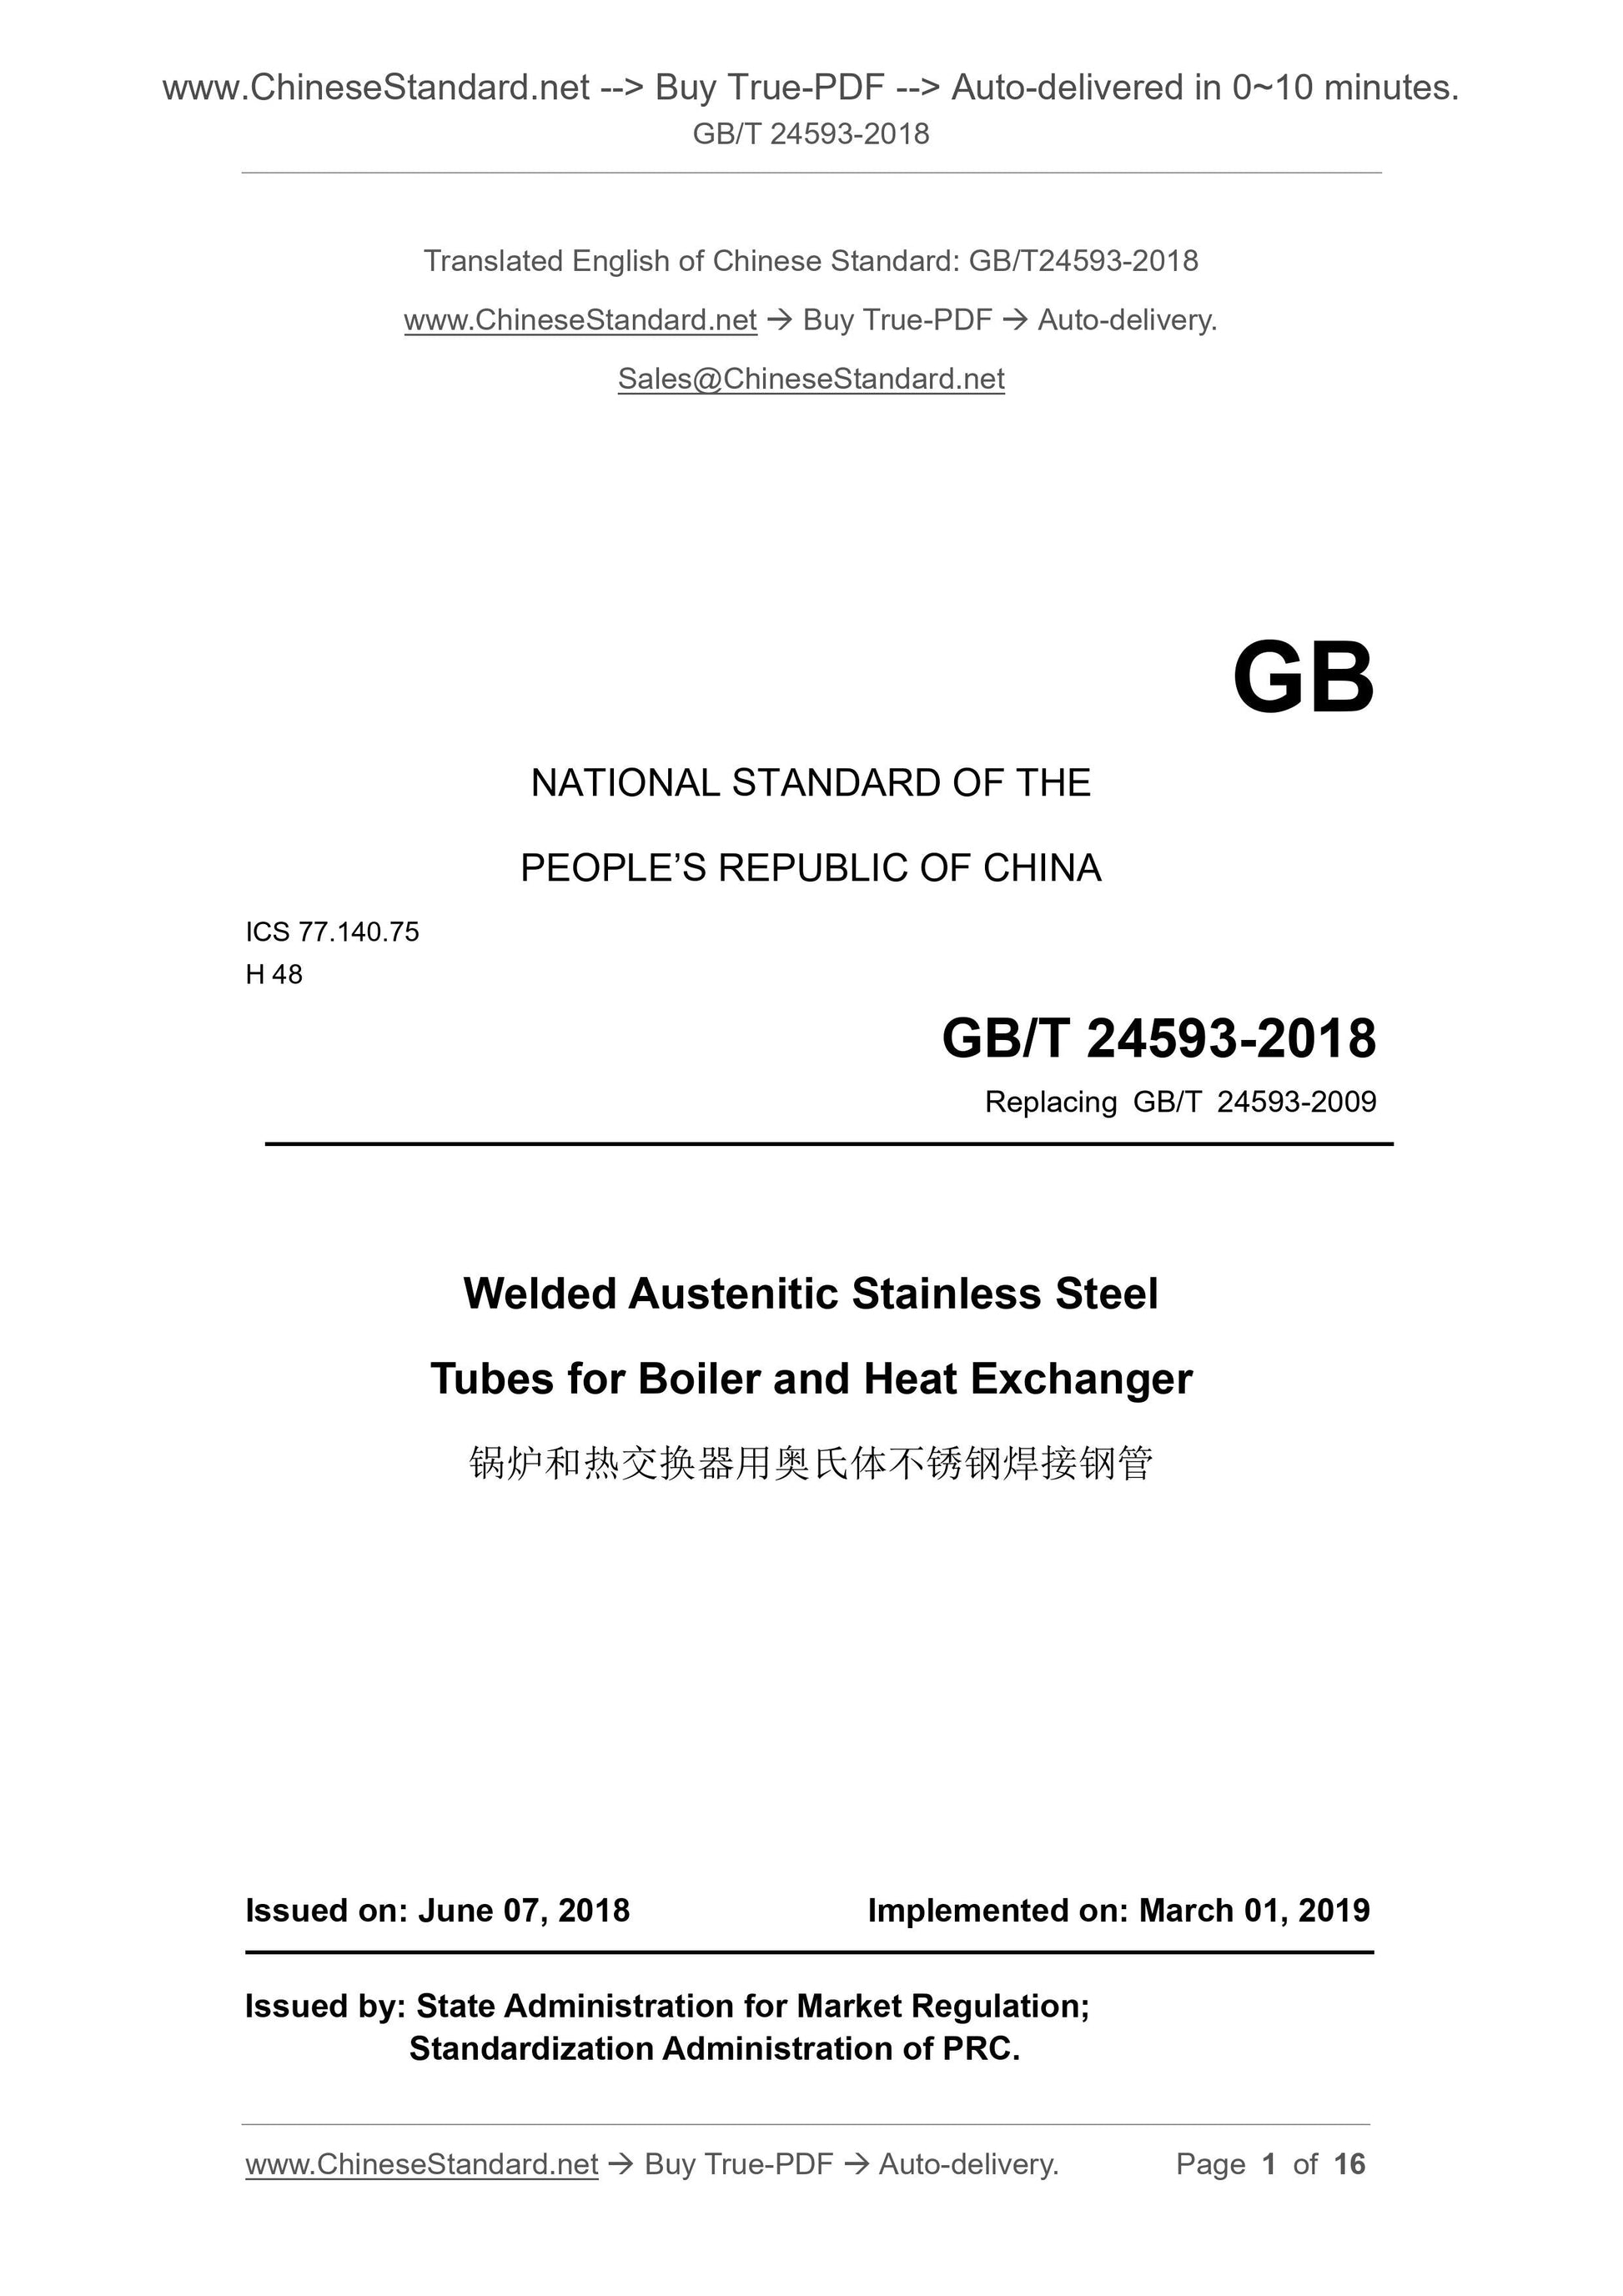 GB/T 24593-2018 Page 1